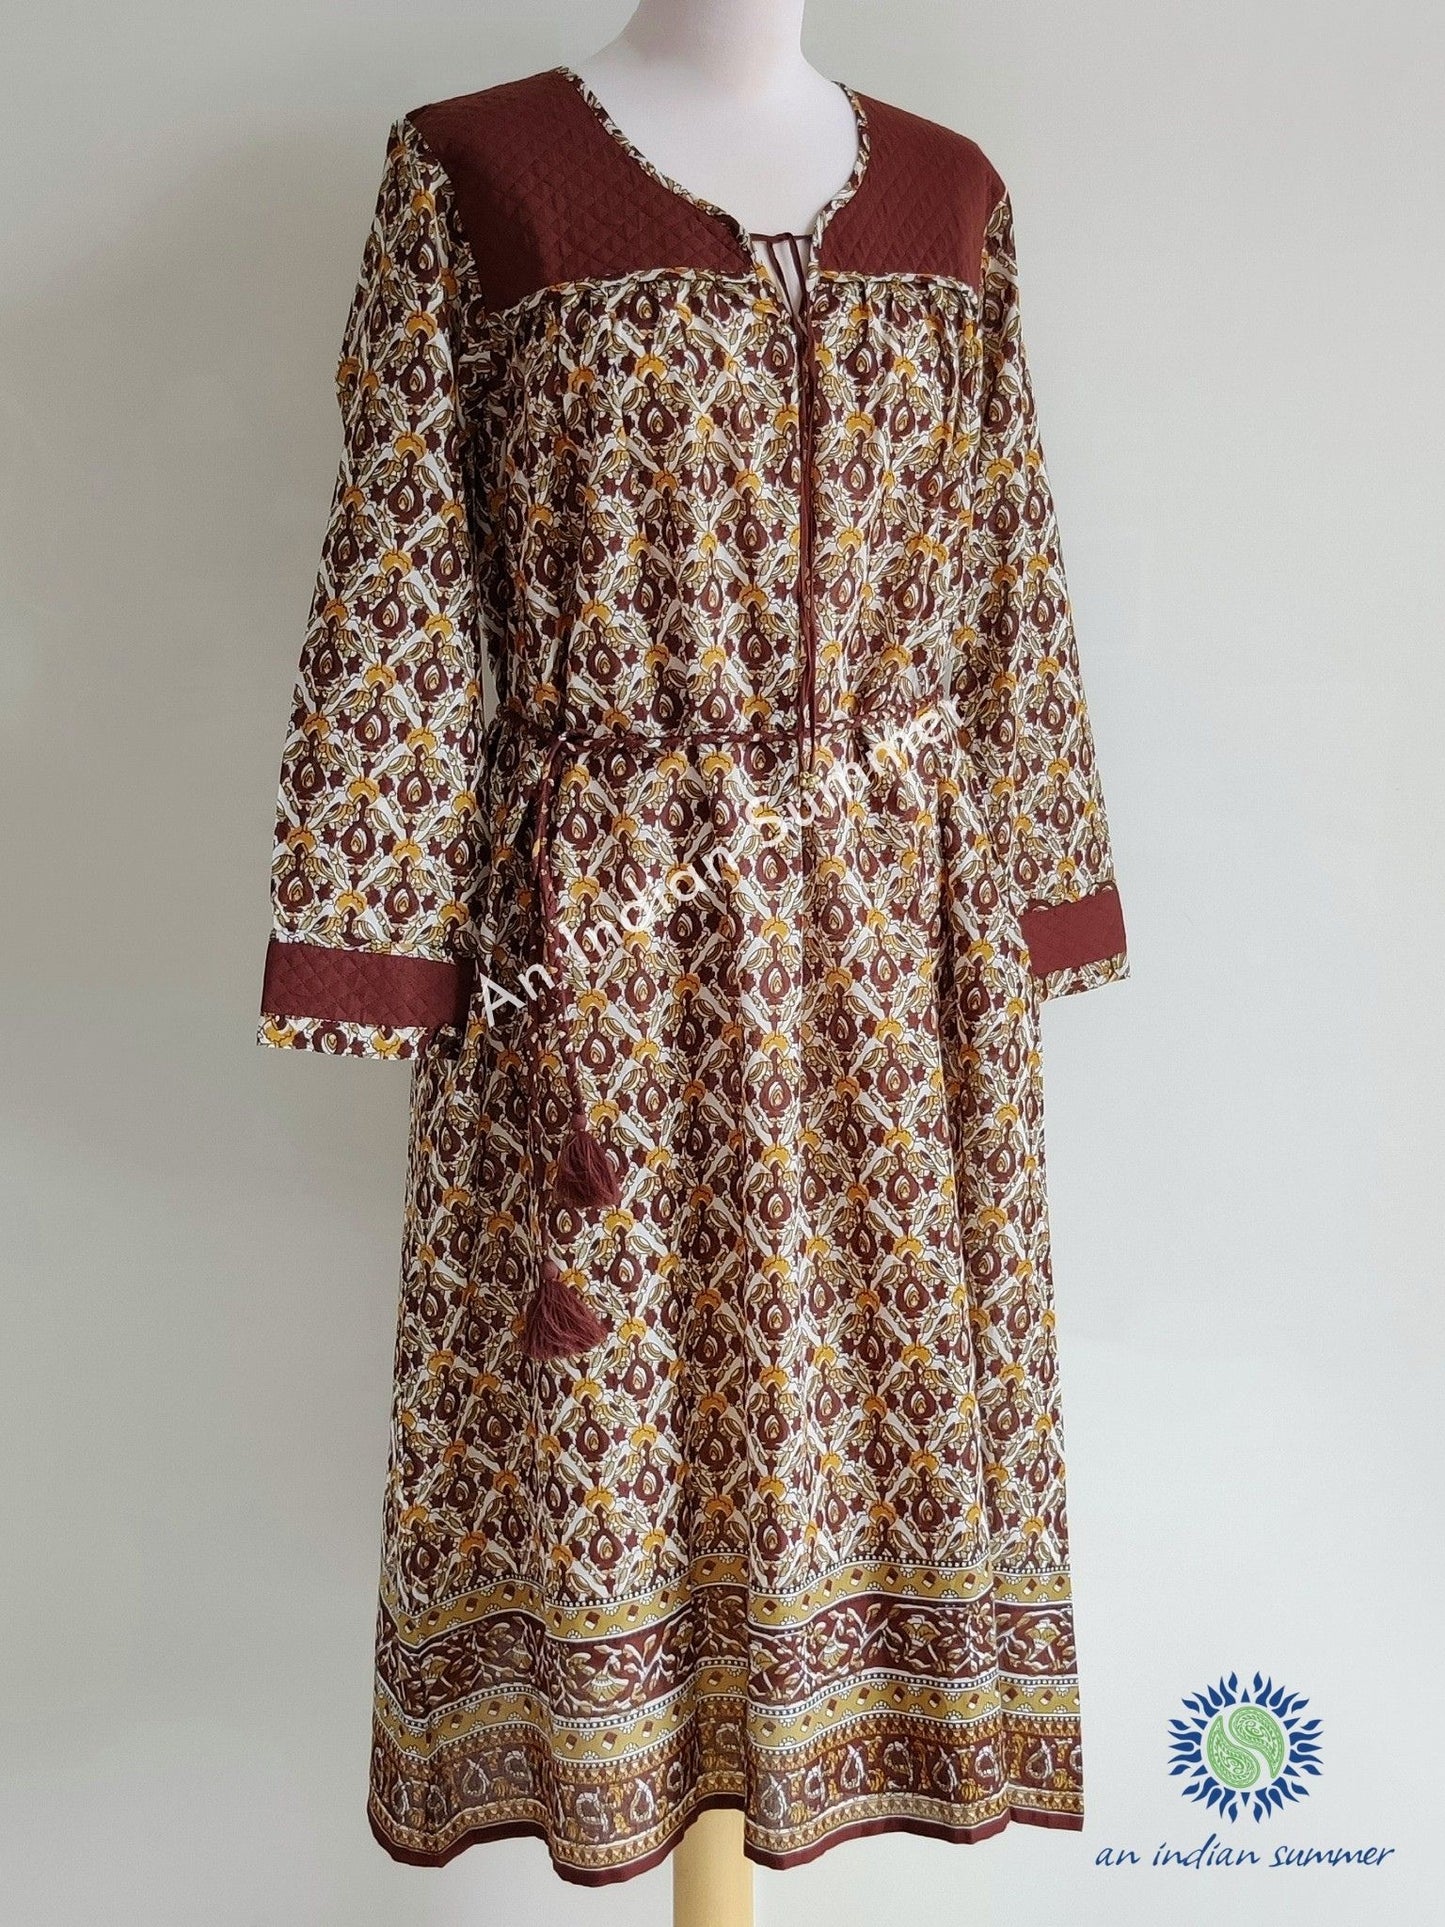 Vintage Quilted Dress with Belt Chestnut Brown | Cotton Voile | An Indian Summer | Seasonless Timeless Sustainable Ethical Authentic Artisan Conscious Clothing Lifestyle Brand